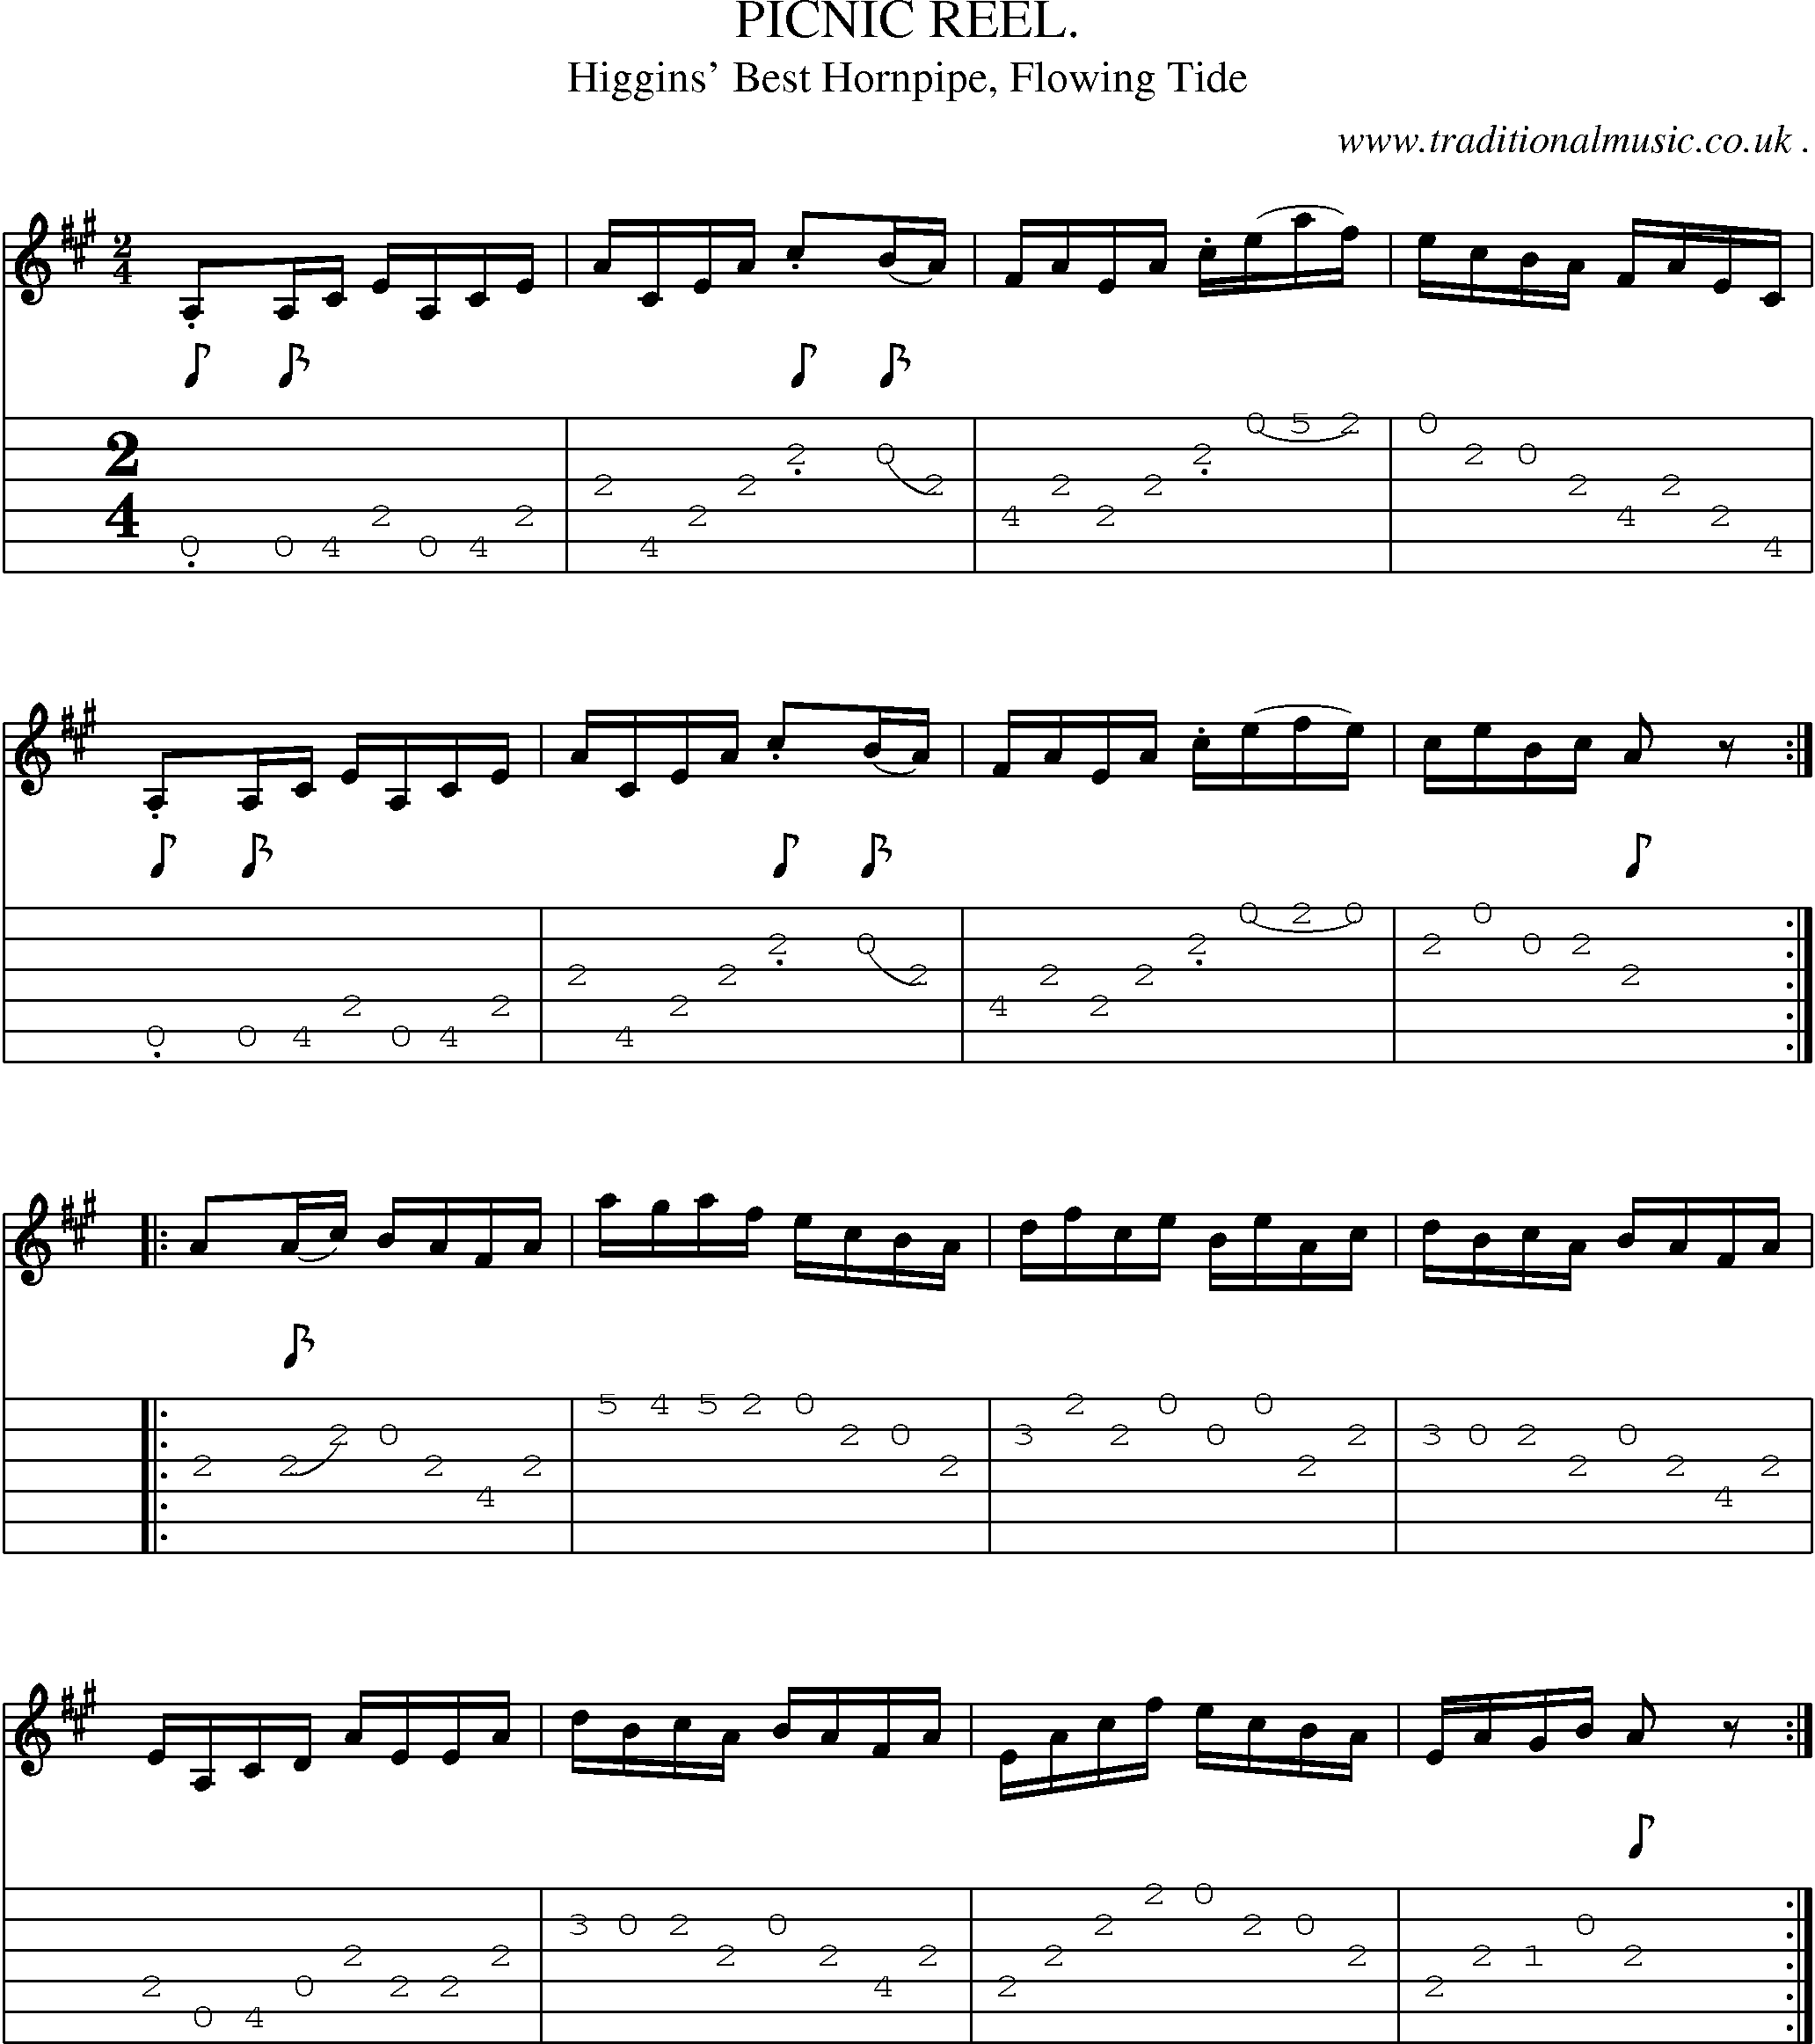 Sheet-Music and Guitar Tabs for Picnic Reel